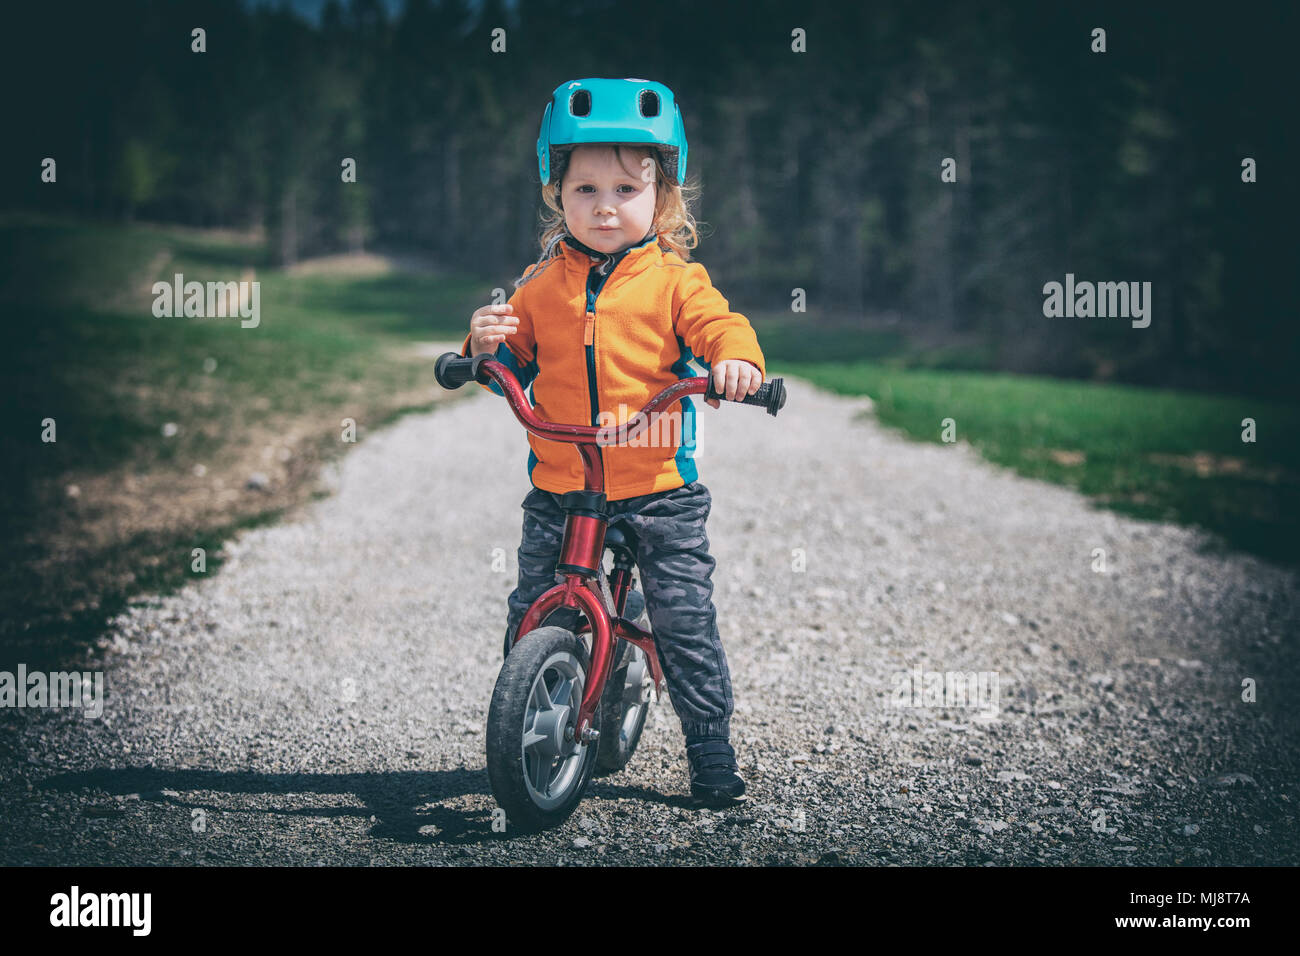 cute little girl training cycling on rural road lomo style picture Stock Photo